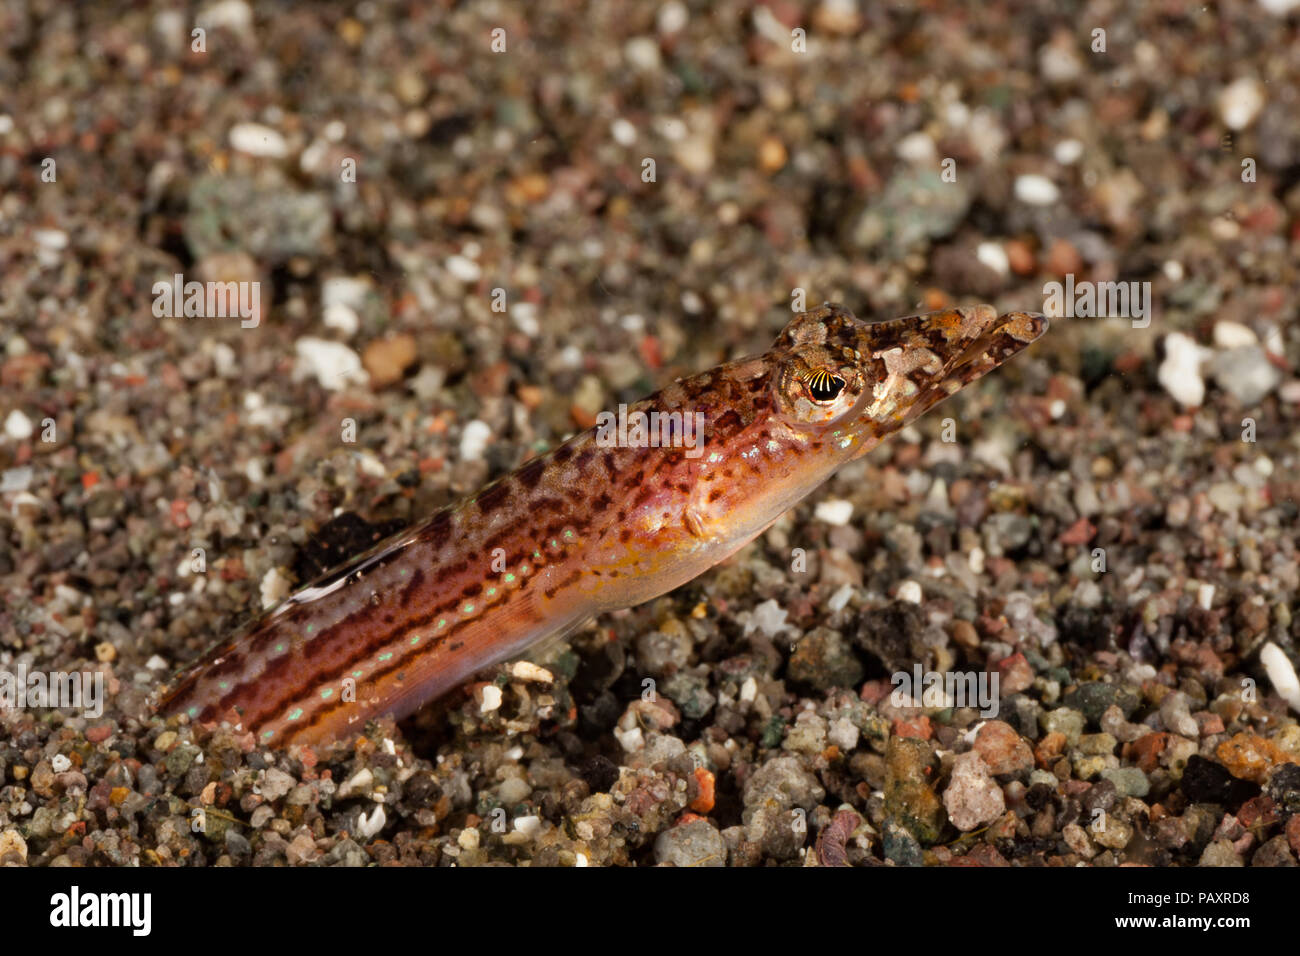 Found in the Indo-Pacific, the elegant sand diver, Trichonotus elegans, is usually found buried in a sandy bottom unless there is current present when Stock Photo